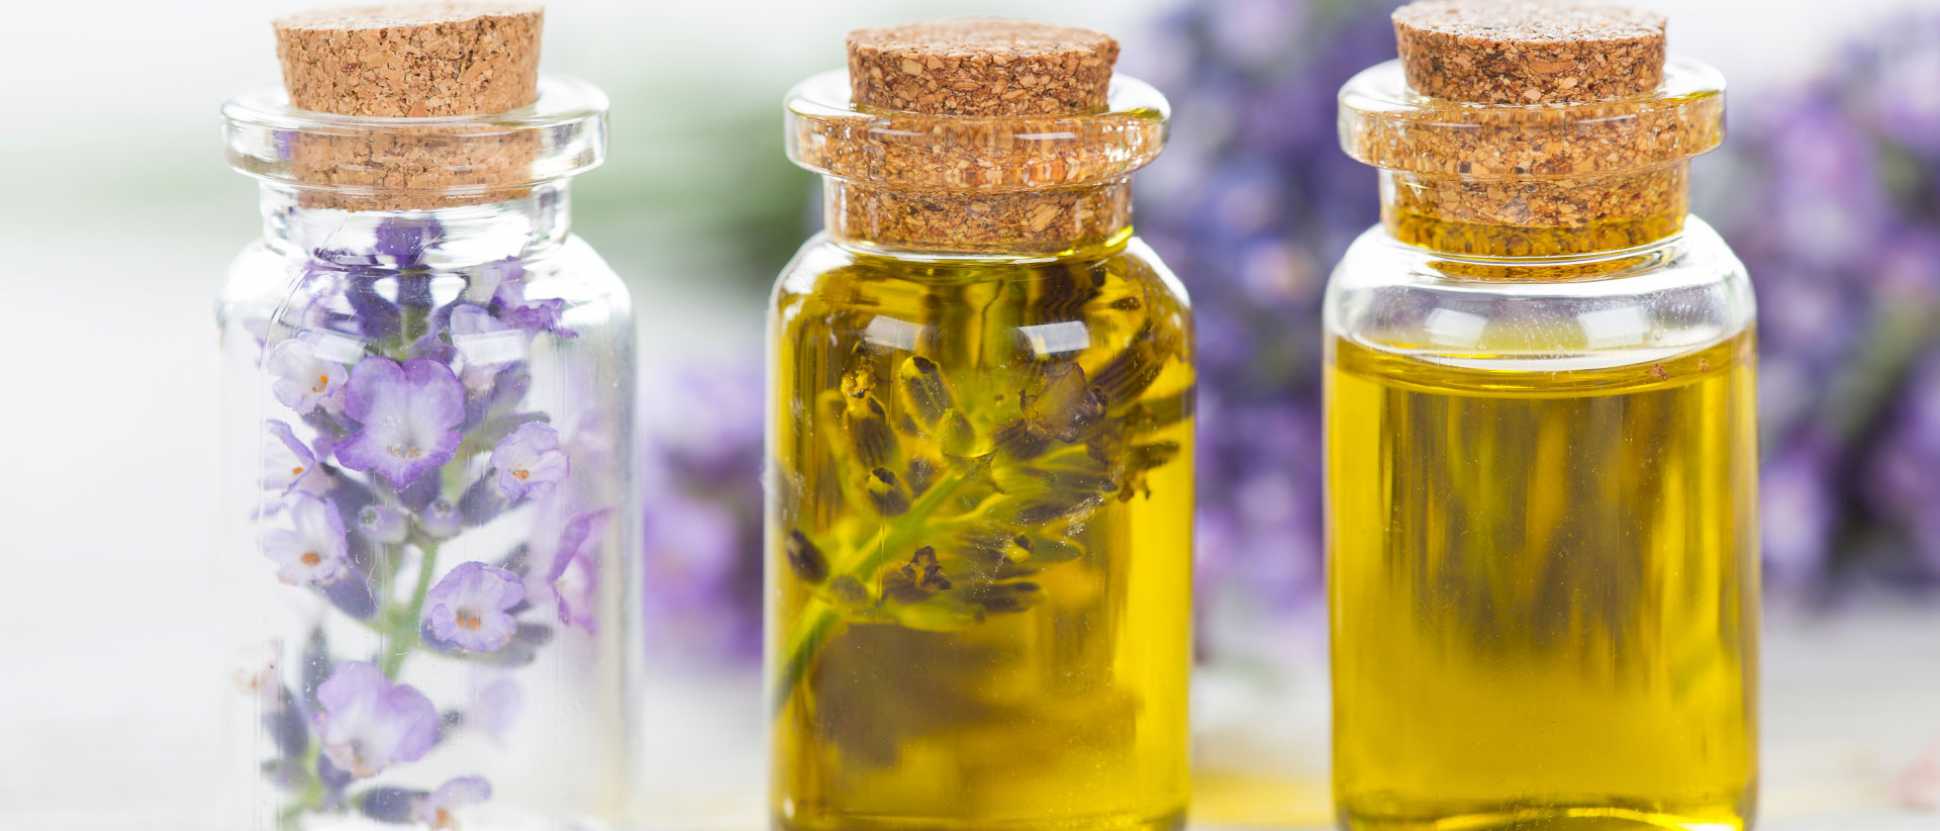 160602-Topical-lavender-oil-promotes-wound-healingjpg